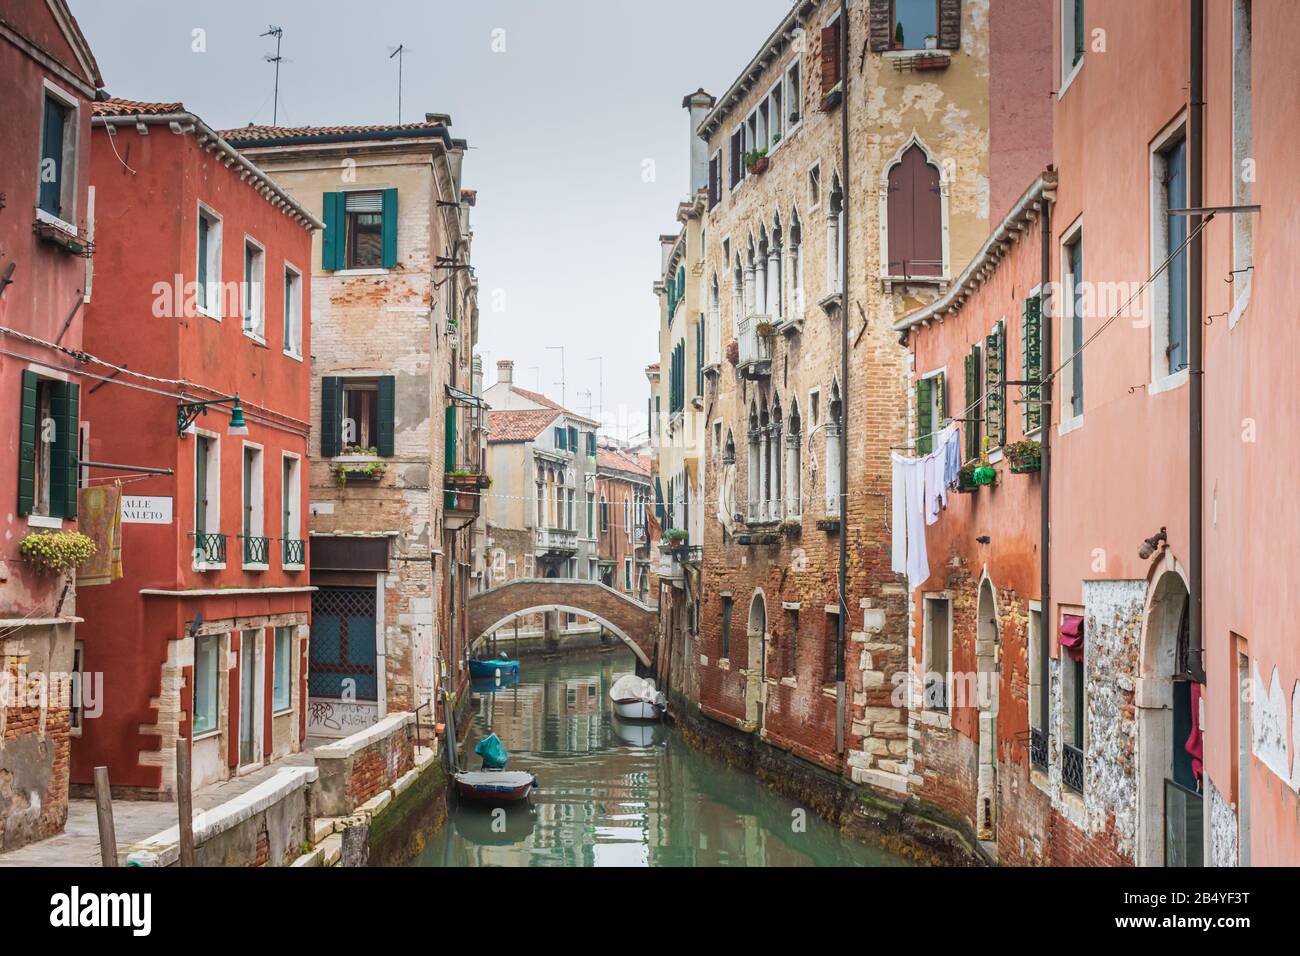 A canal lined with houses and apartments in the residential district of Venice, Italy Stock Photo